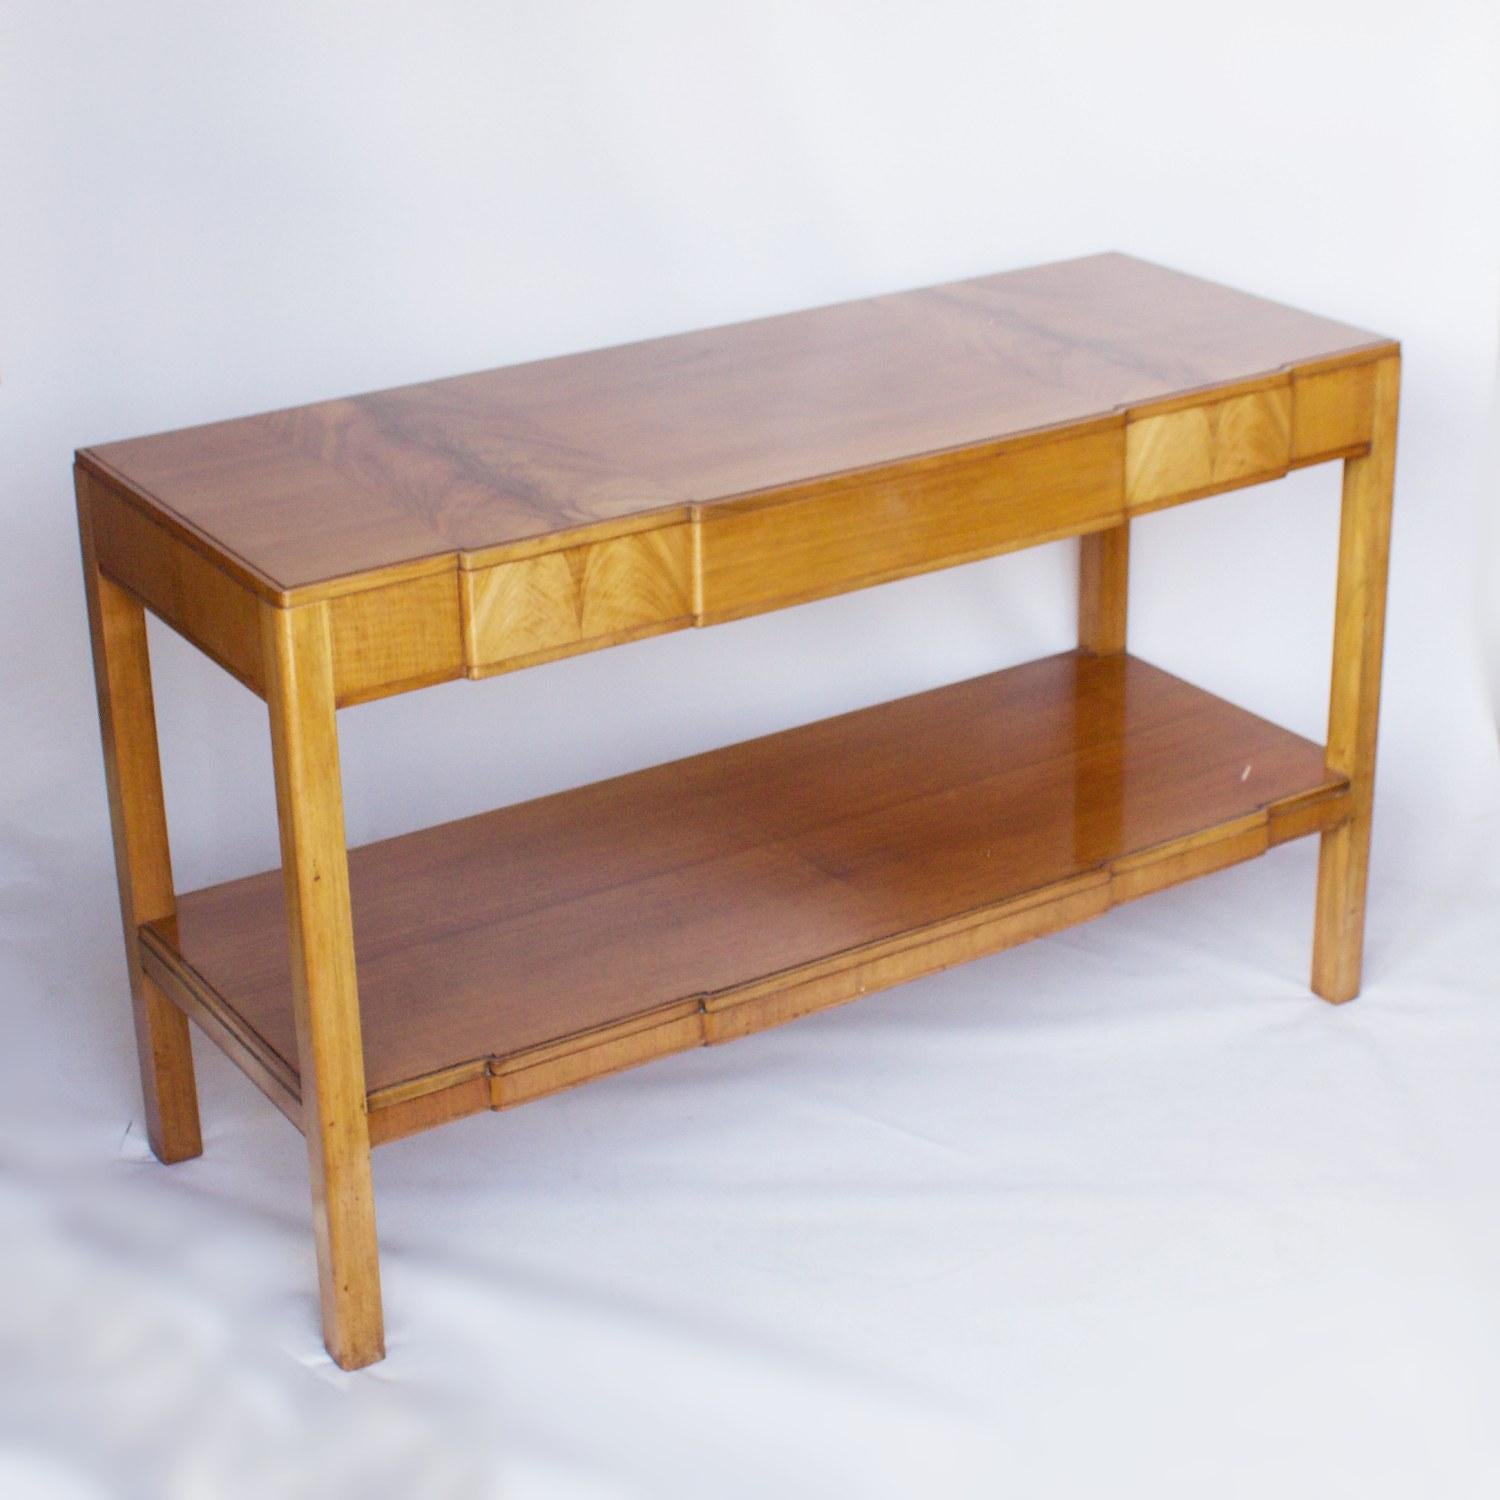 English Art Deco Console Table by Heal's of London, Burr and Straight Grain Walnut